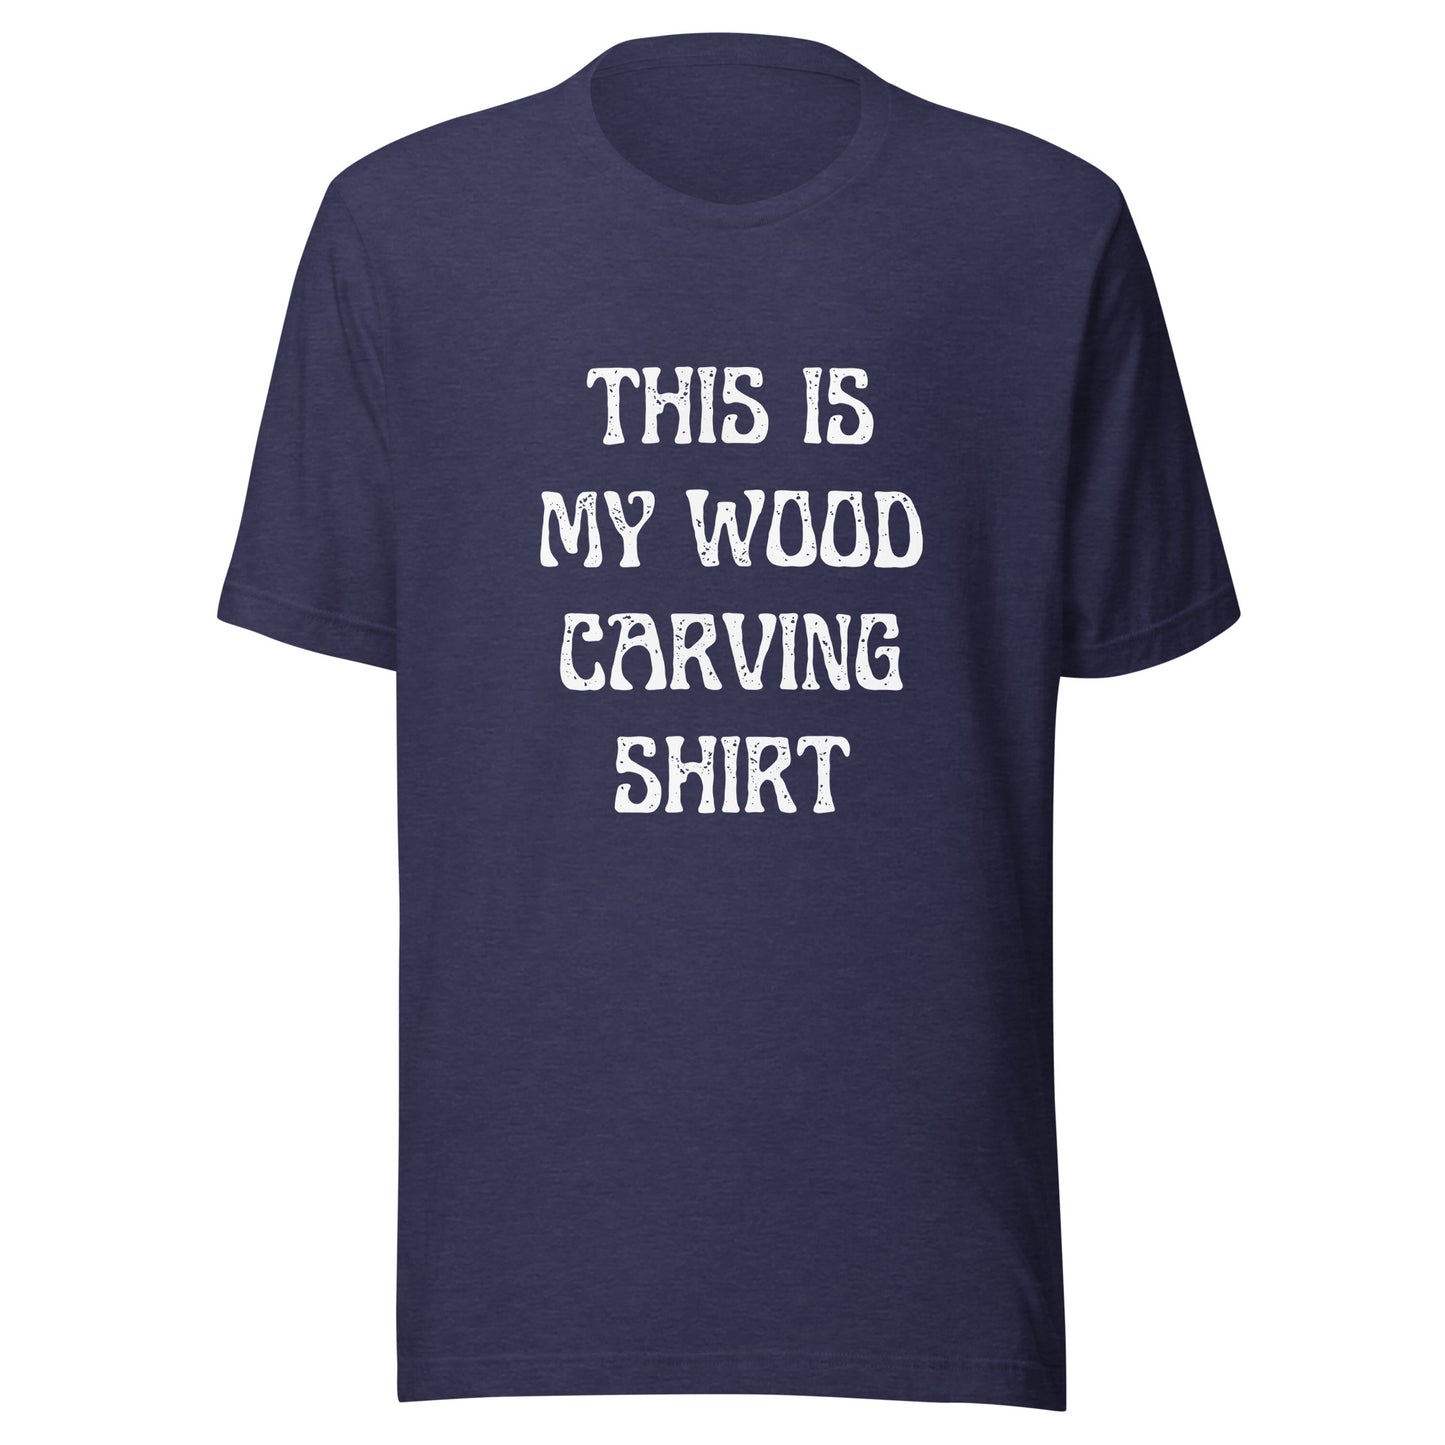 This is My Wood Carving Shirt - Unisex t-shirt - Dark Colors